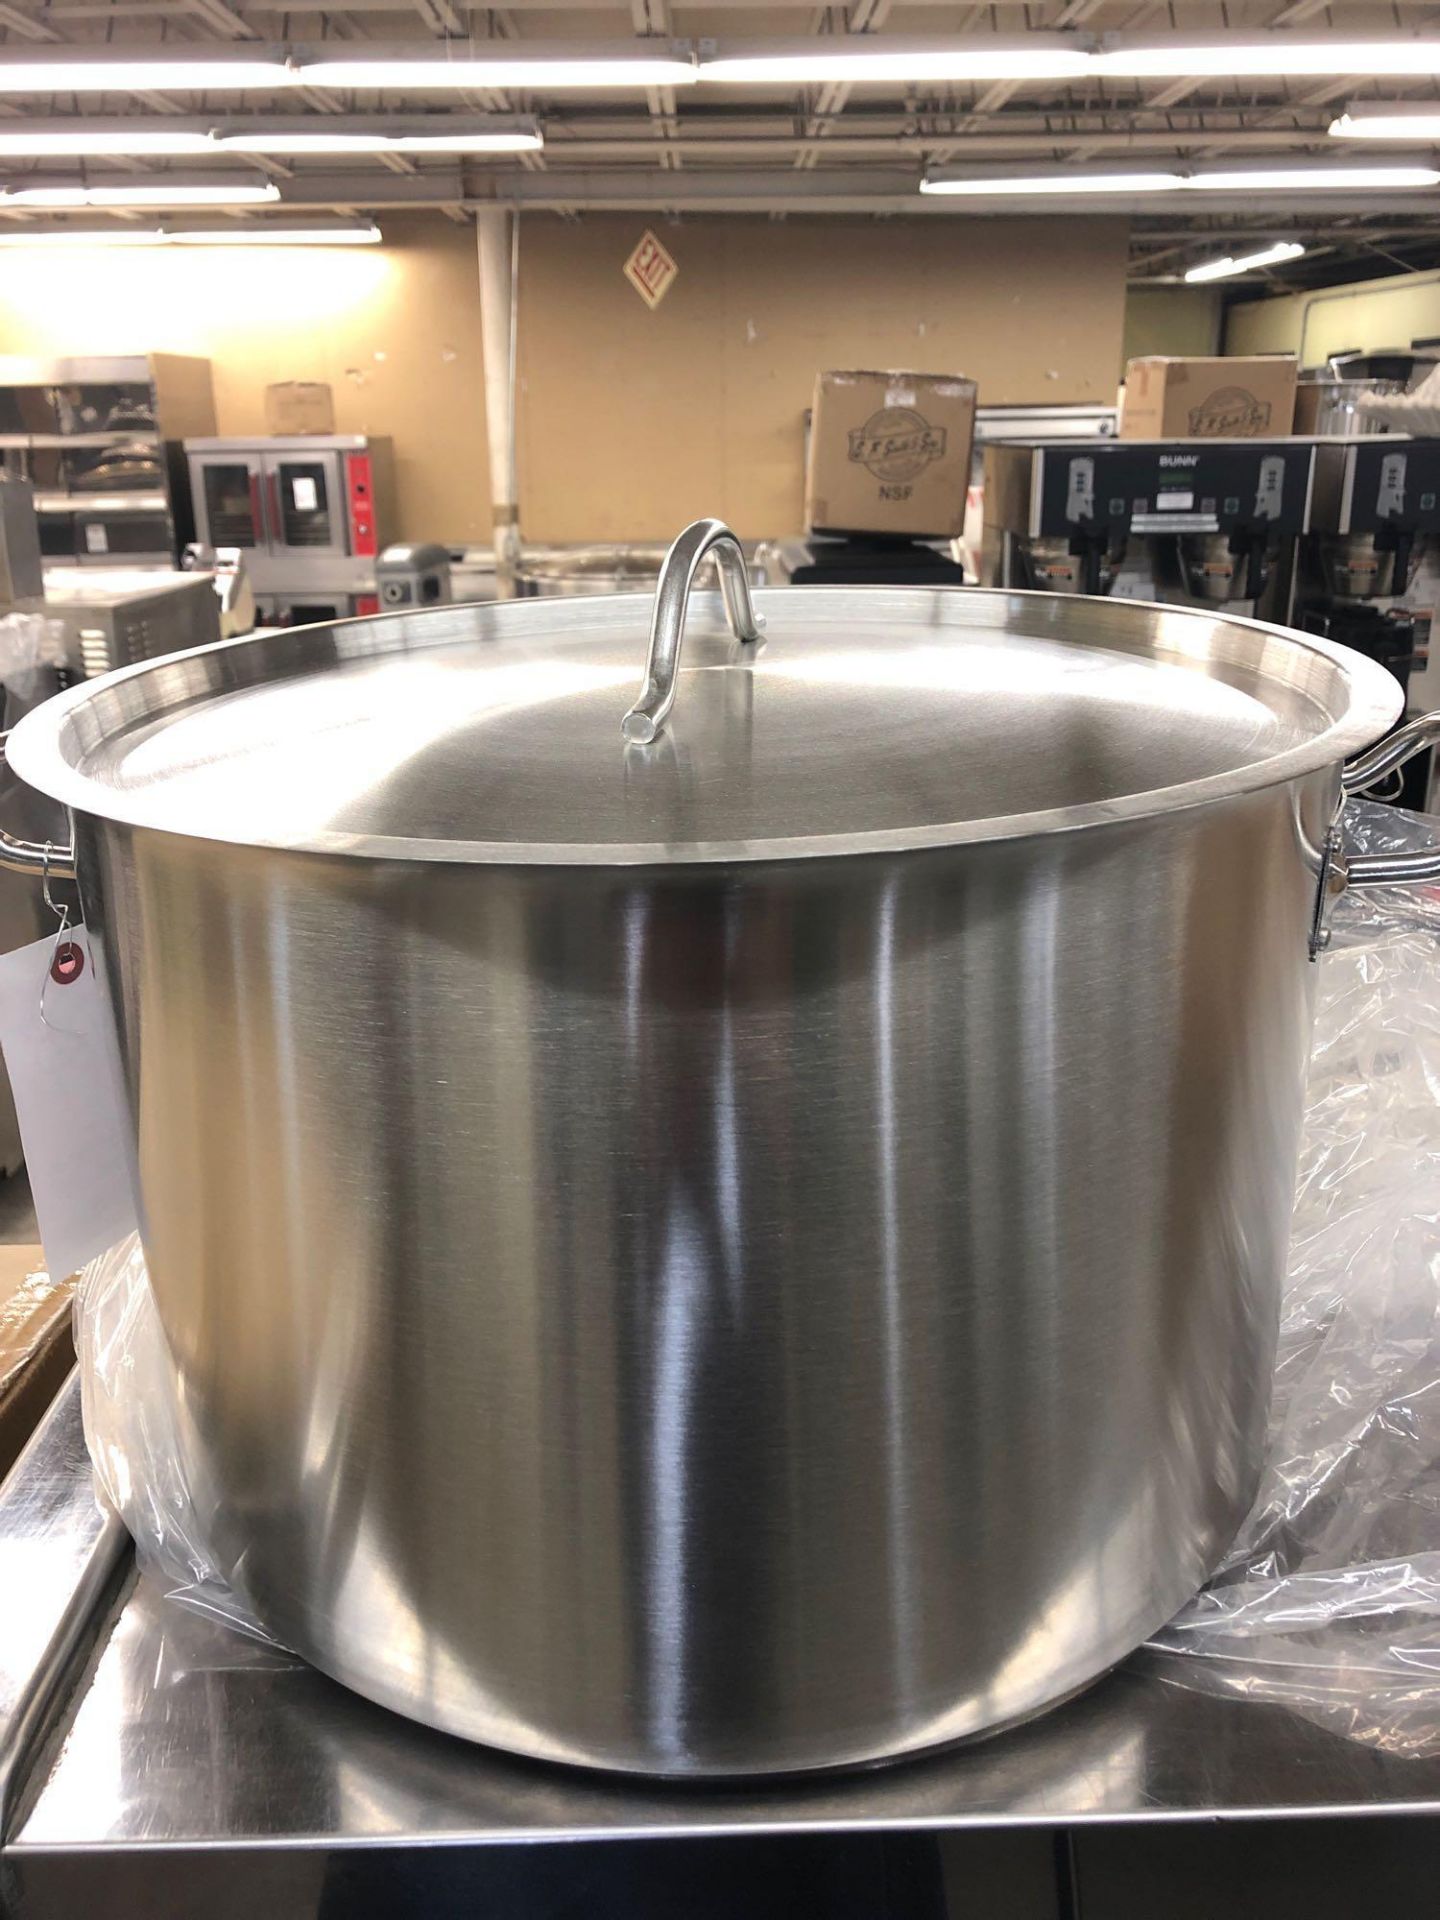 32 L stainless steel stock pot with cover